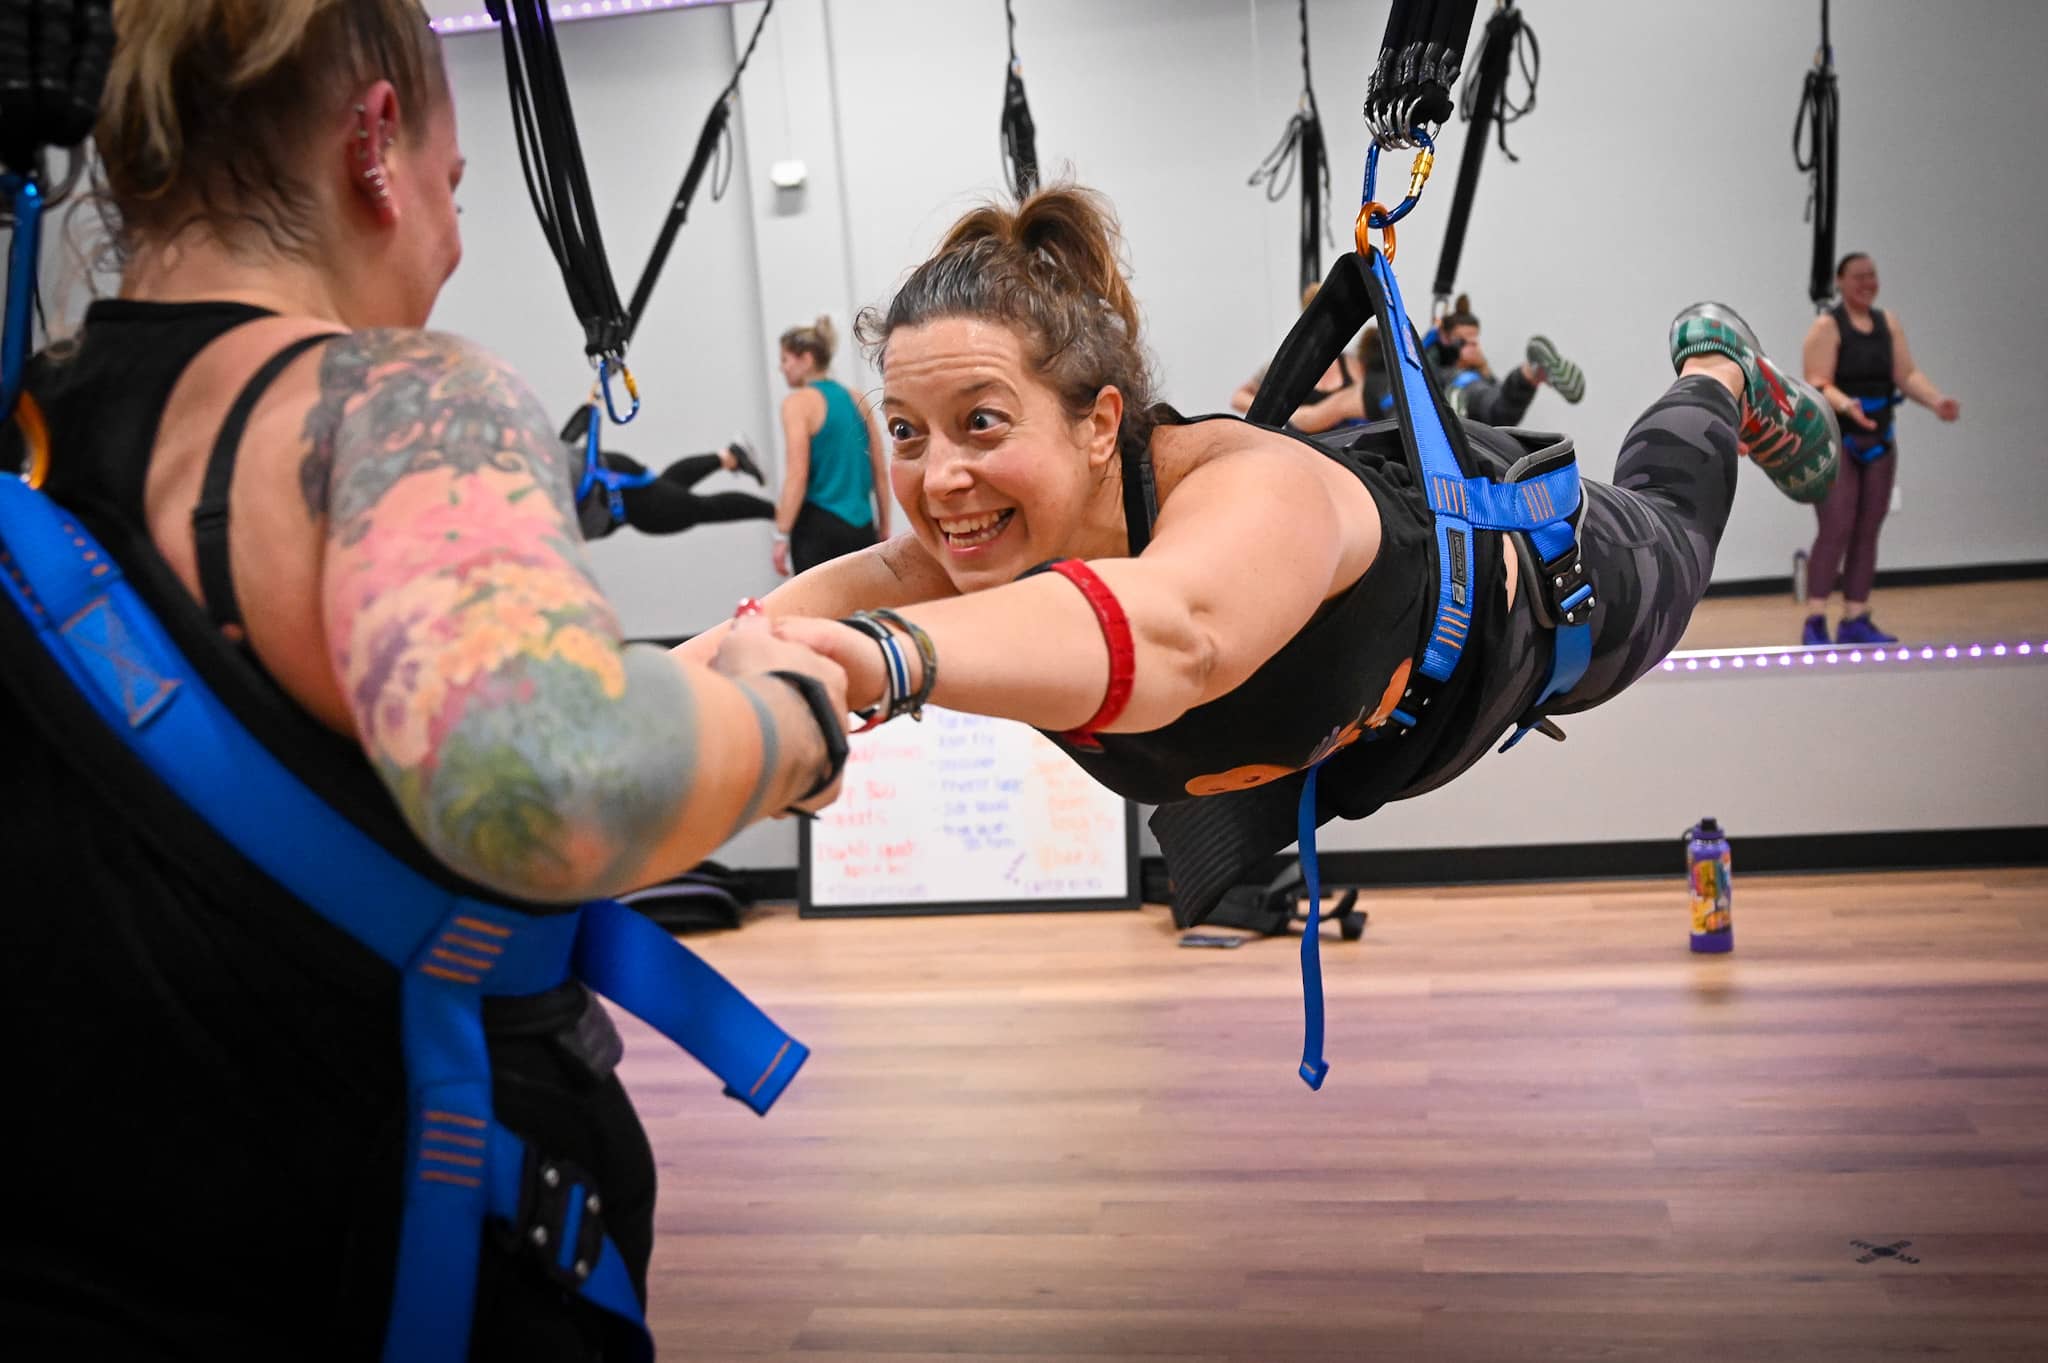 Bungee fitness arrives in Sioux Falls 